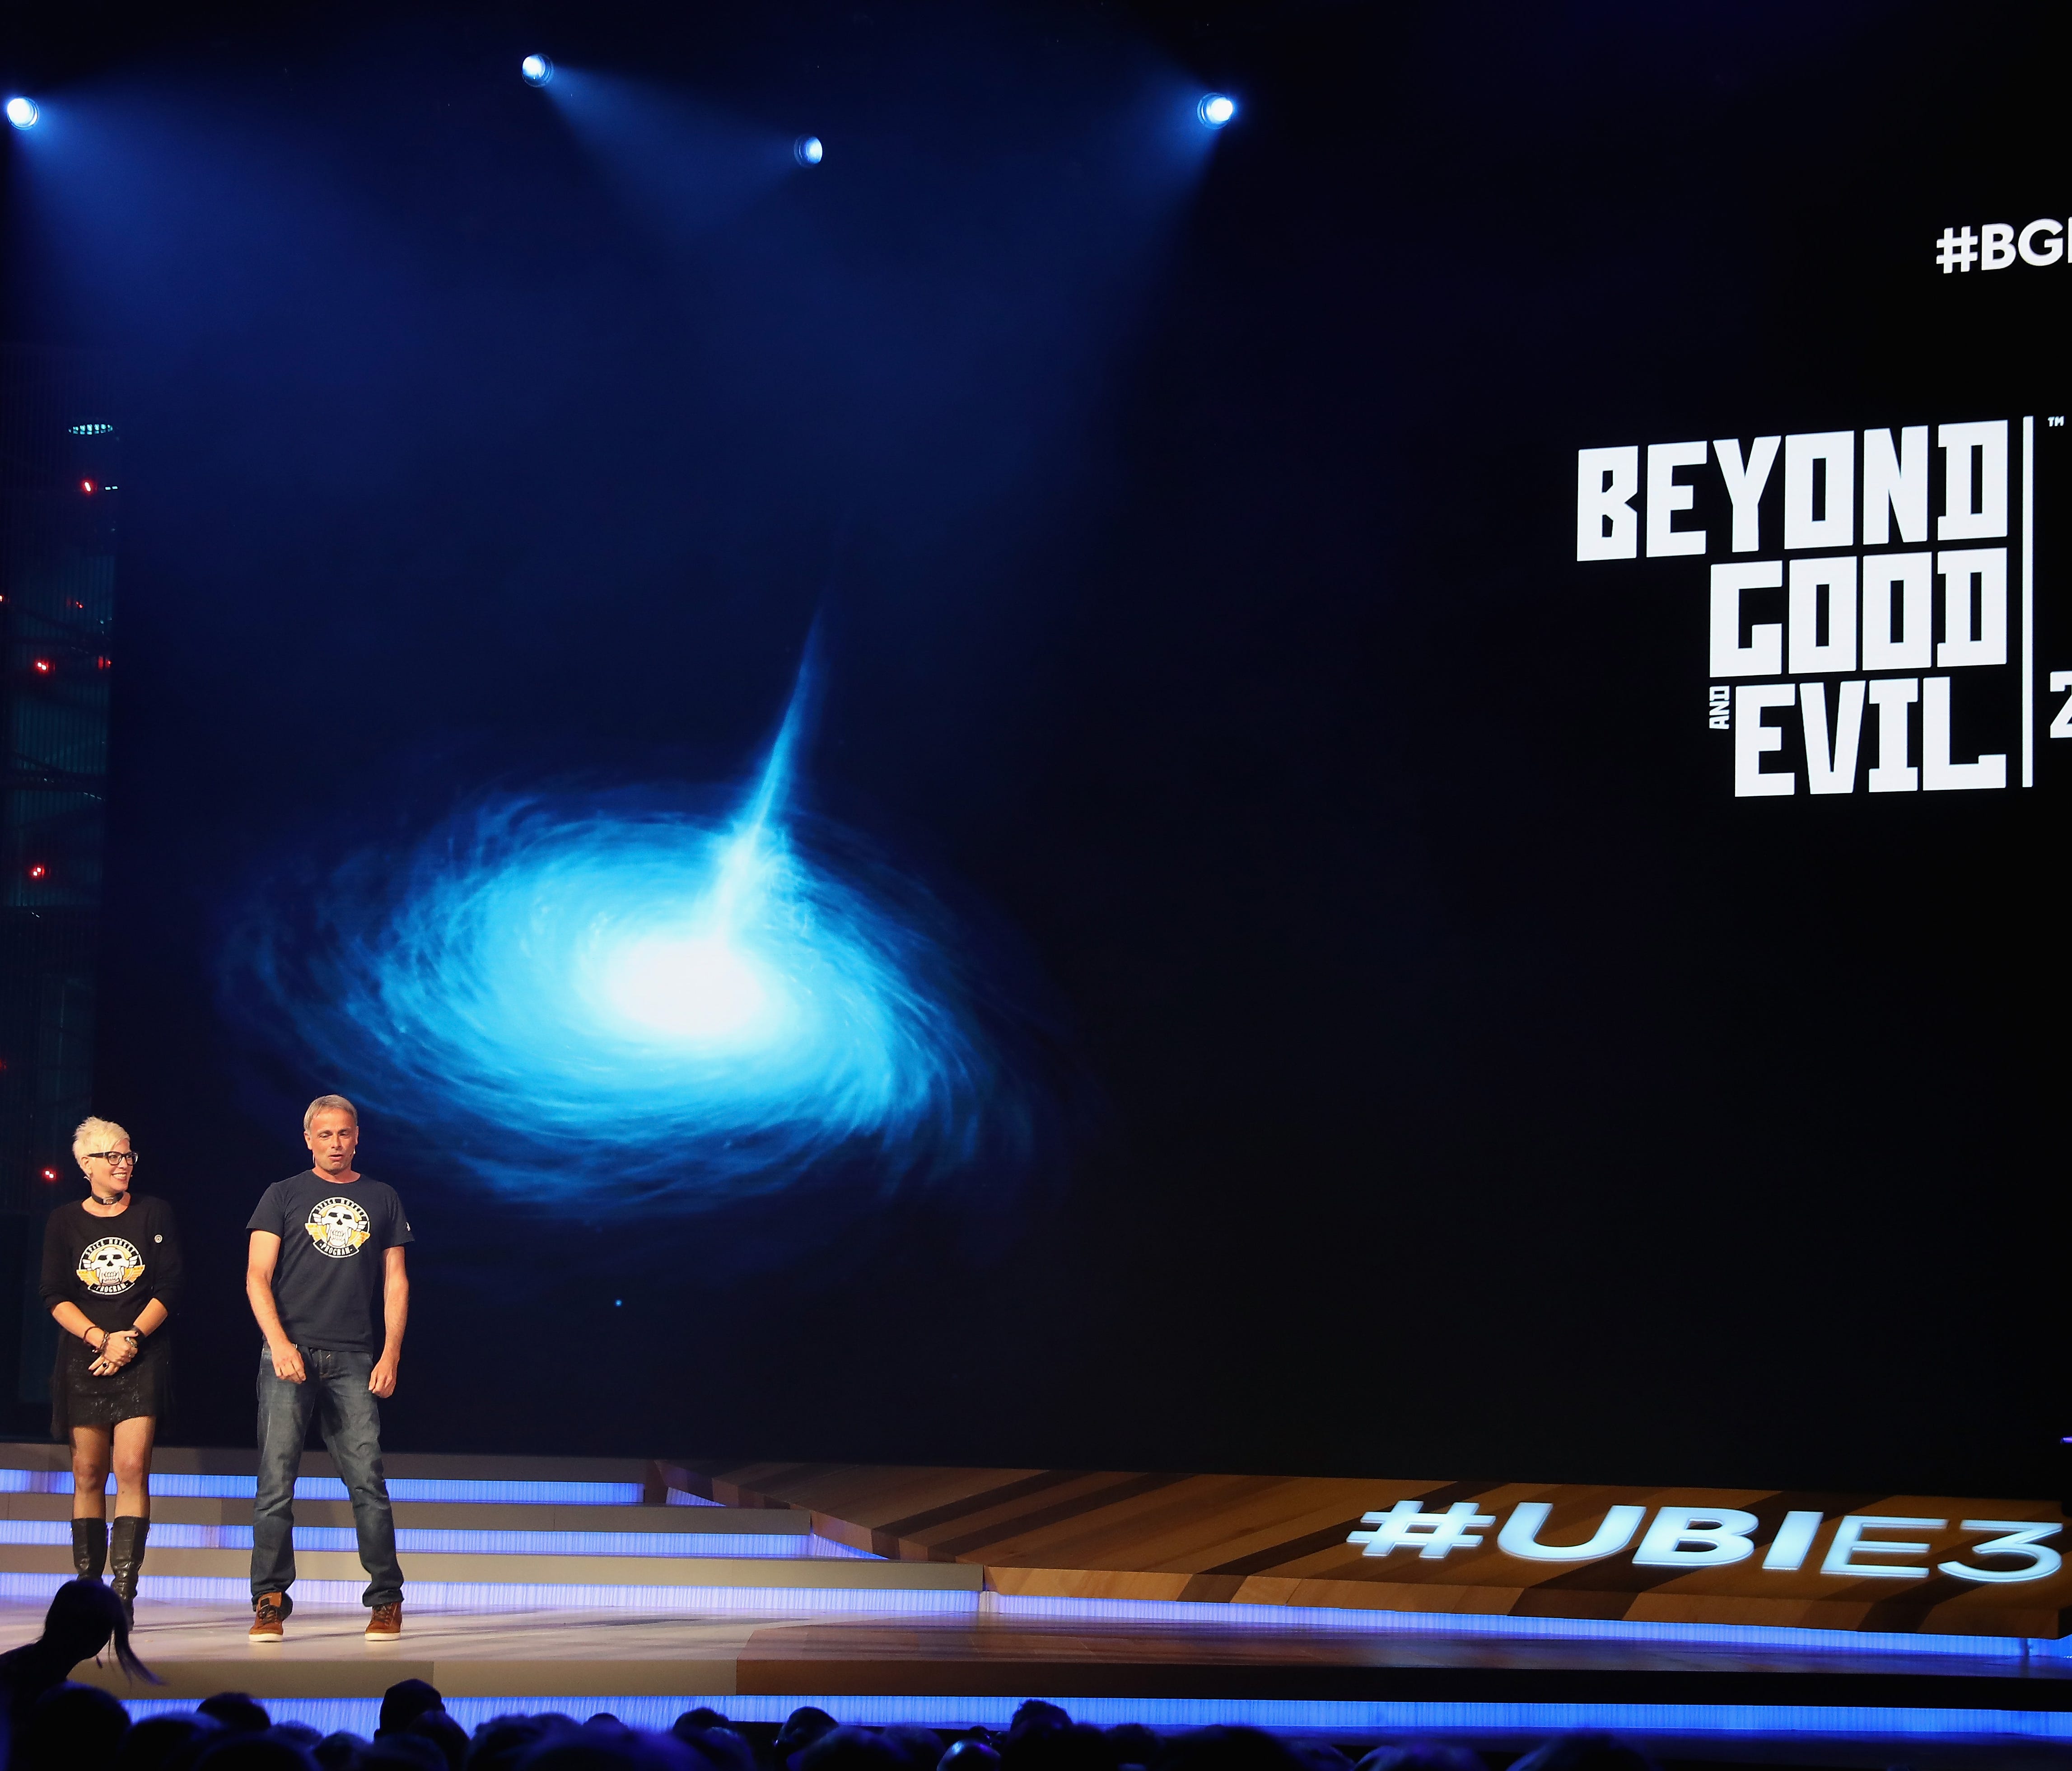 Ubisoft Narrative Director Gabrielle Shrager, left, and Ubisoft Montpellier Studio's Michel Ancel introduce 'Beyond Good and Evil 2' during the Ubisoft E3 conference at the Orpheum Theater in Los Angeles.